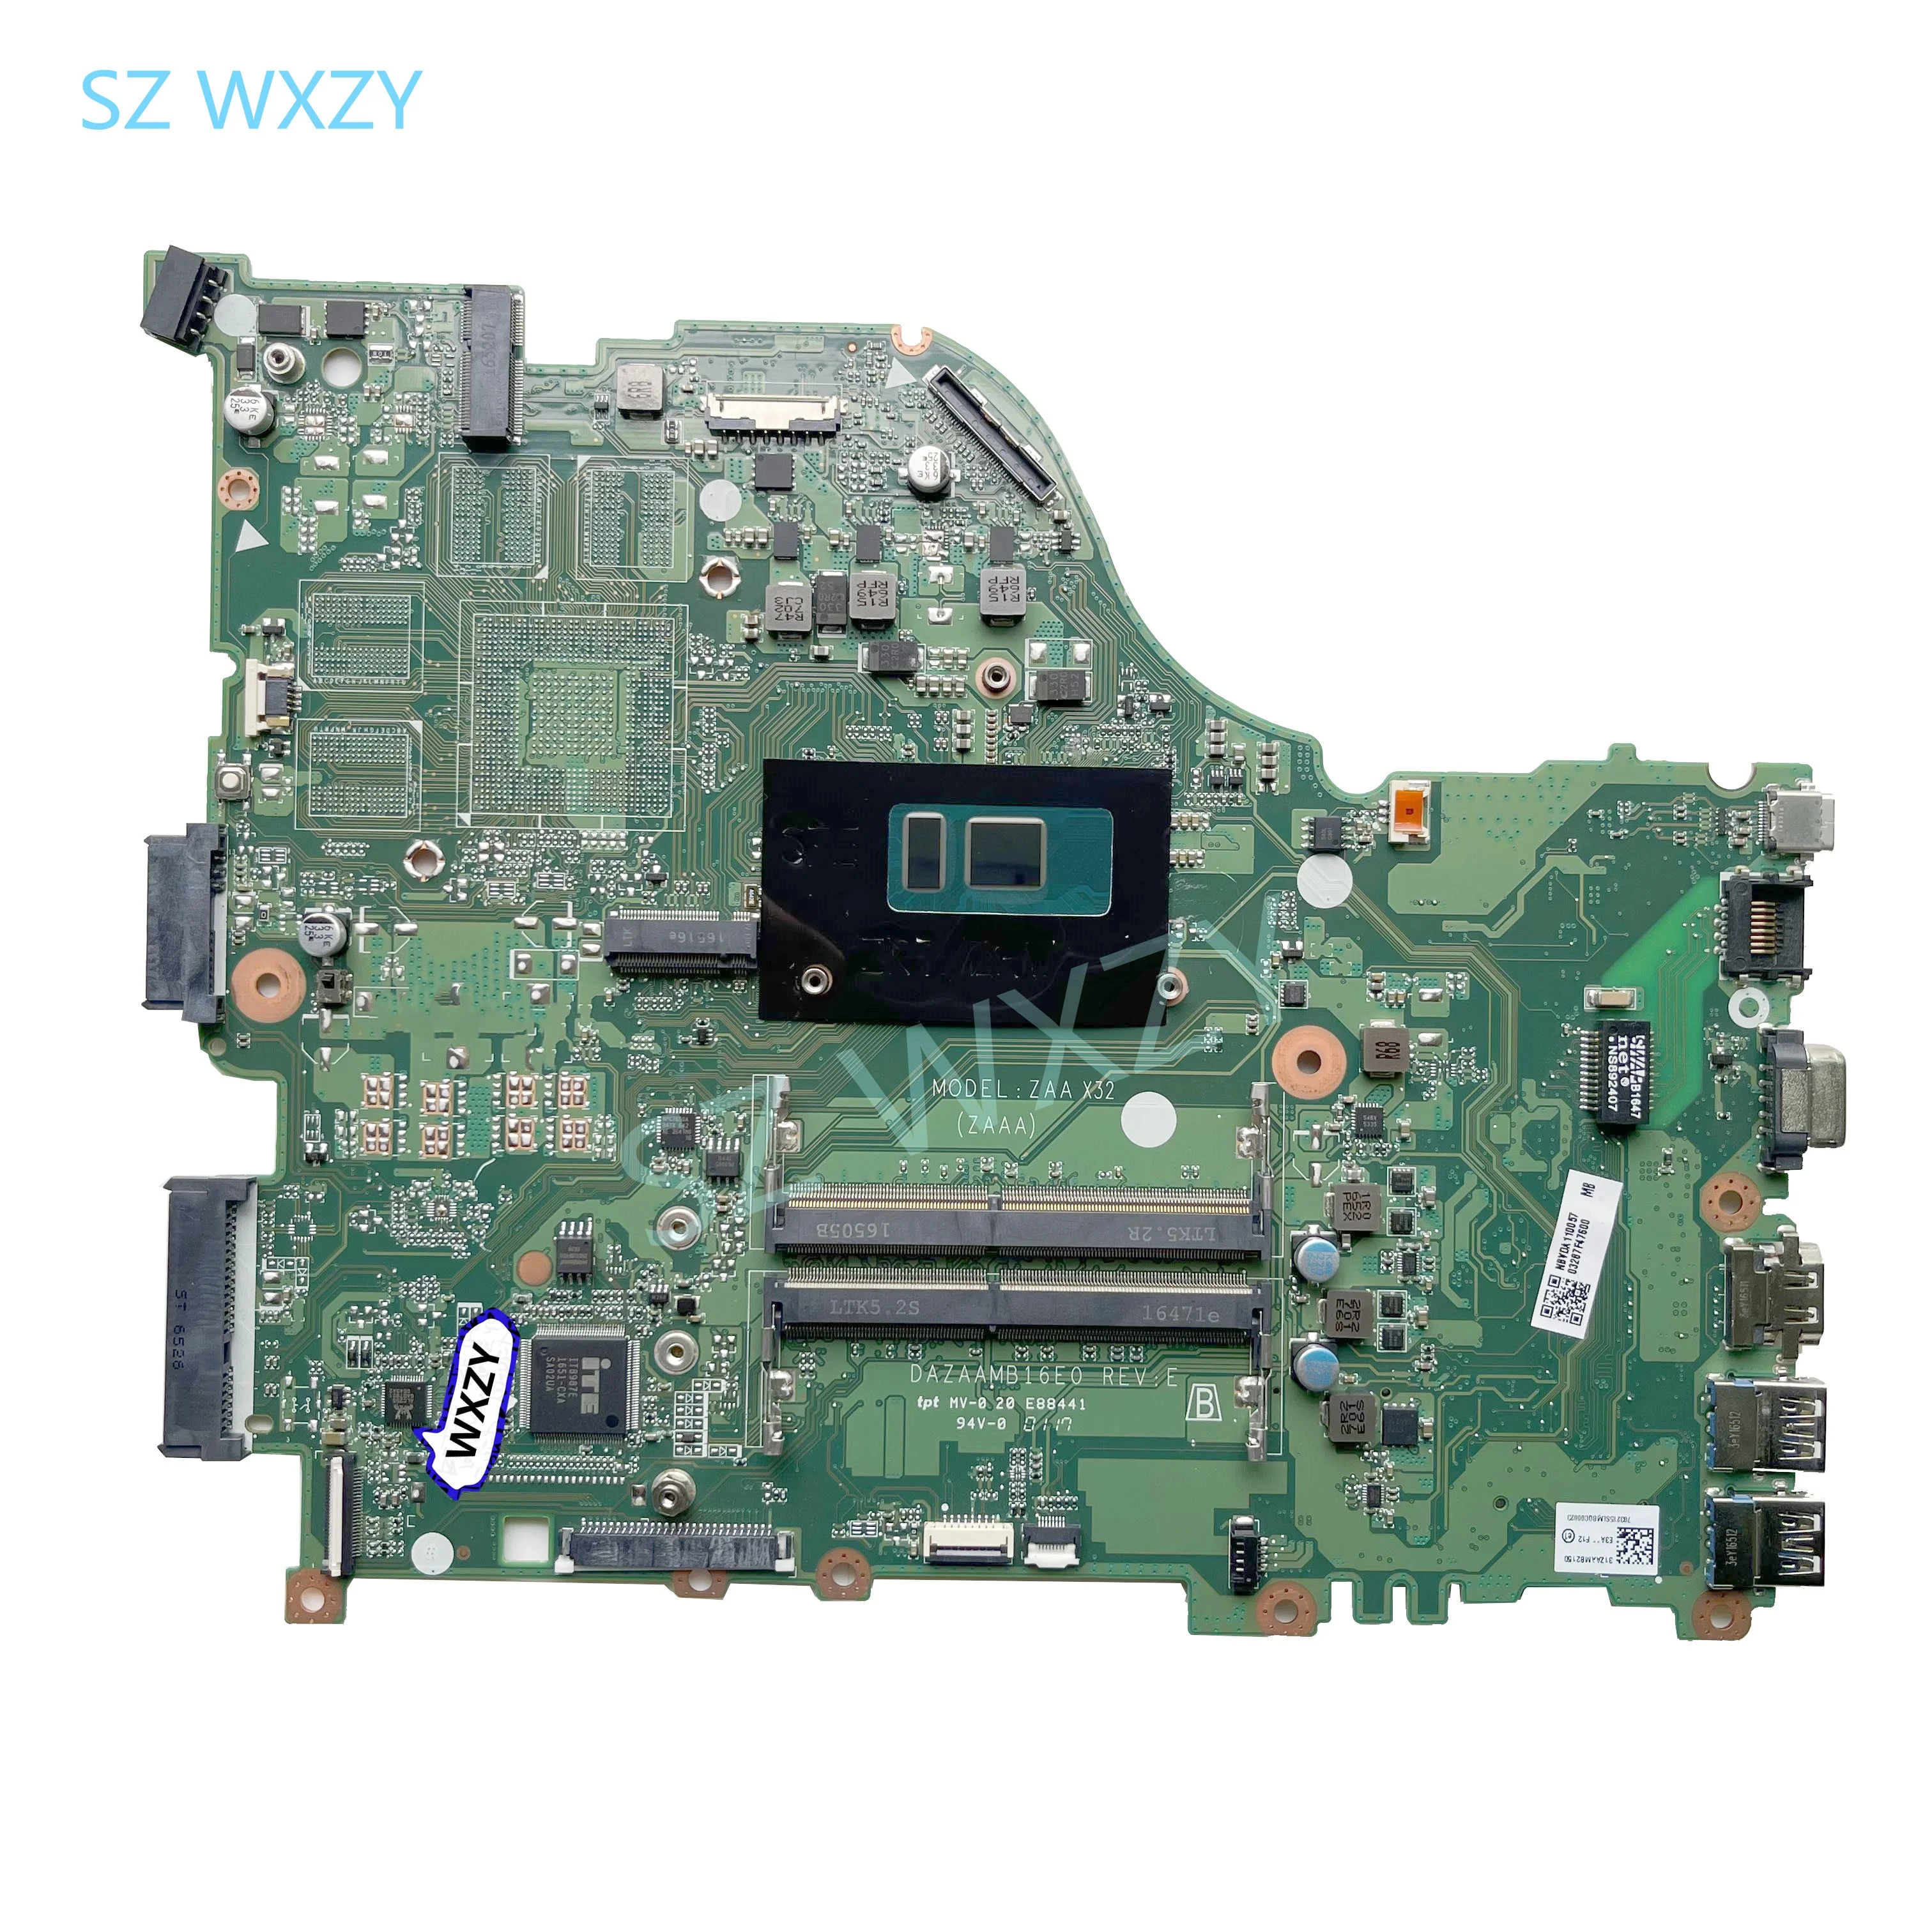 

For ACER E5-575T F5-573 E5-774G Laptop Motherboard,DAZAAMB16E0 NBGG511003 NBGEP110026 NBGEP11002 With I7-7500 DDR4 100% TESTED